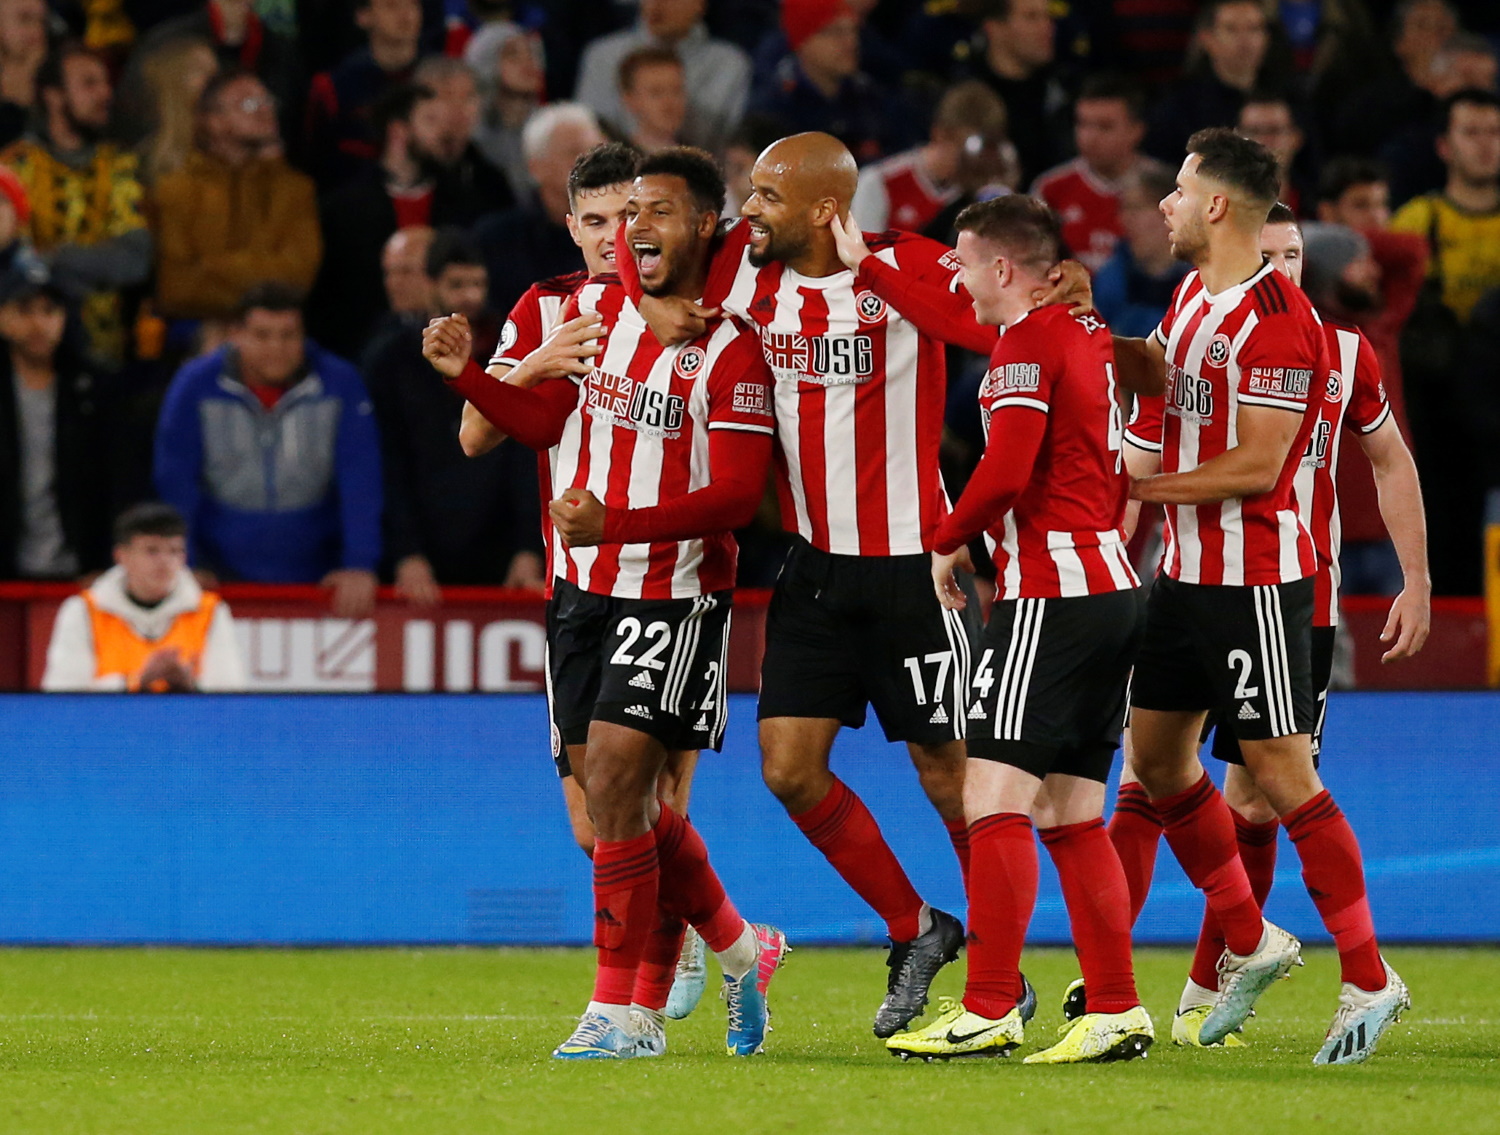 Sheffield United Relegated From The Premier League, Who Will Follow Them?